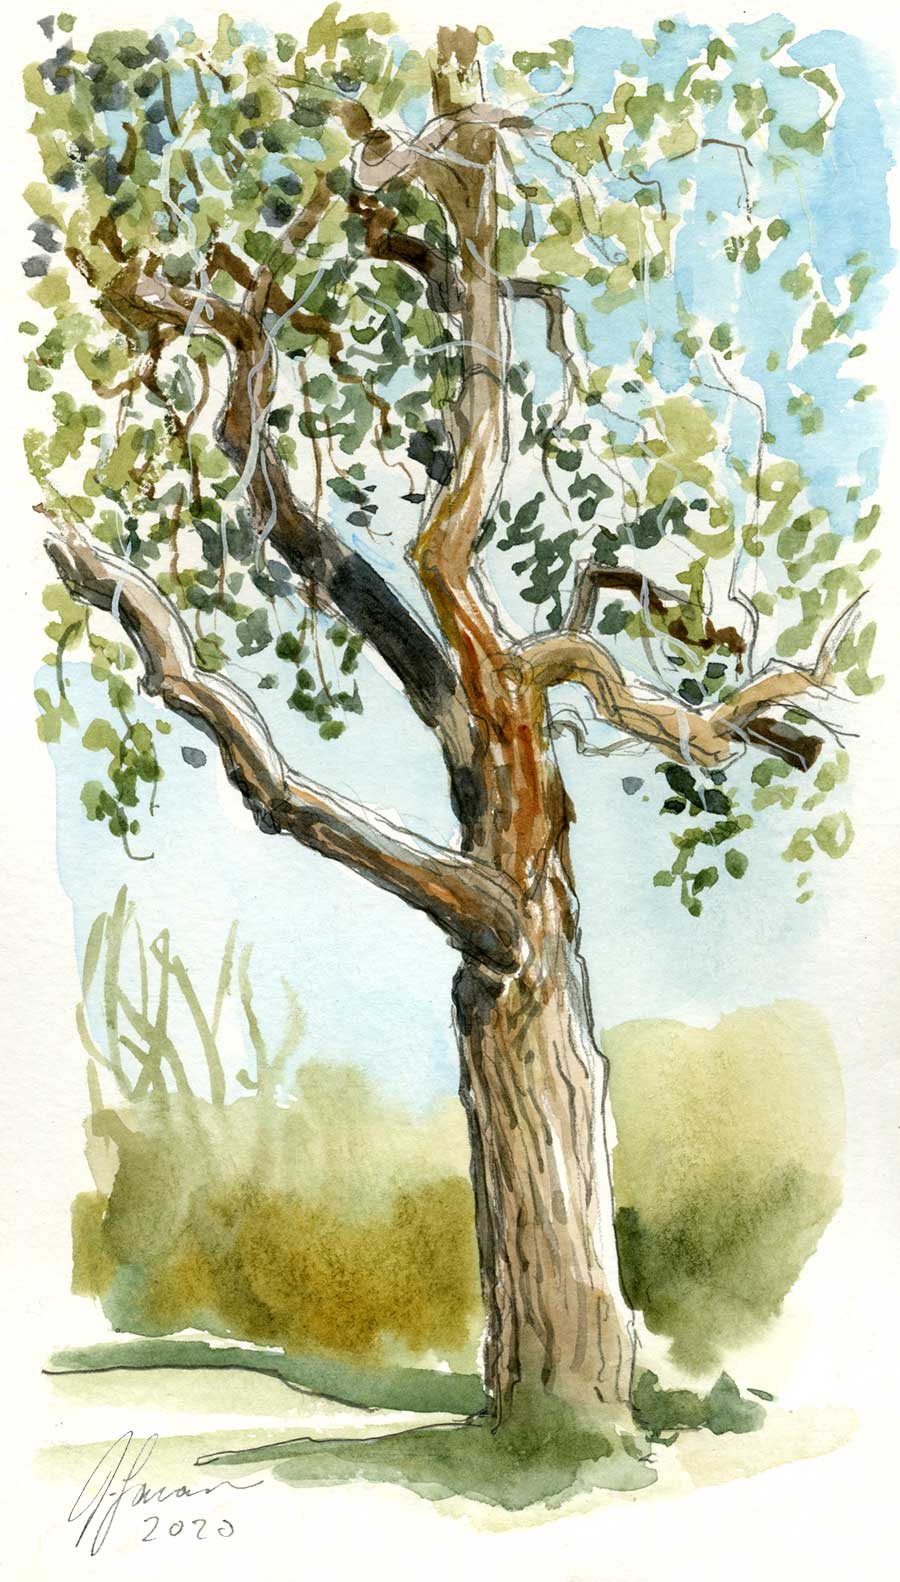 Portrait style watercolor sketch of a large cottonwood tree in the sun with a blue sky and green foliage behind.